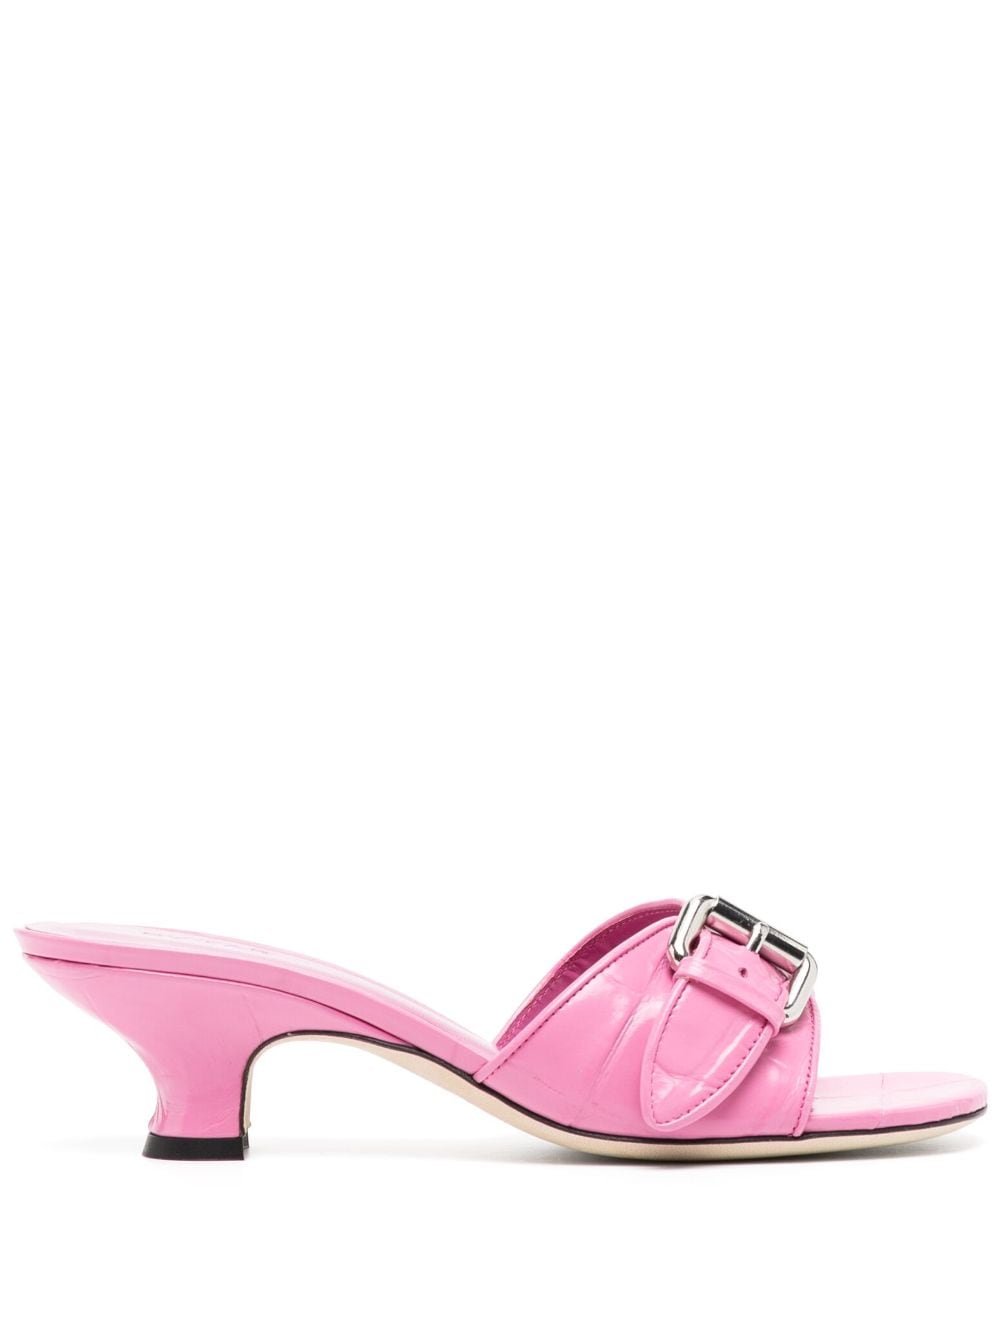 BY FAR Elton 55mm crocodile-embossed leather mules - Pink von BY FAR